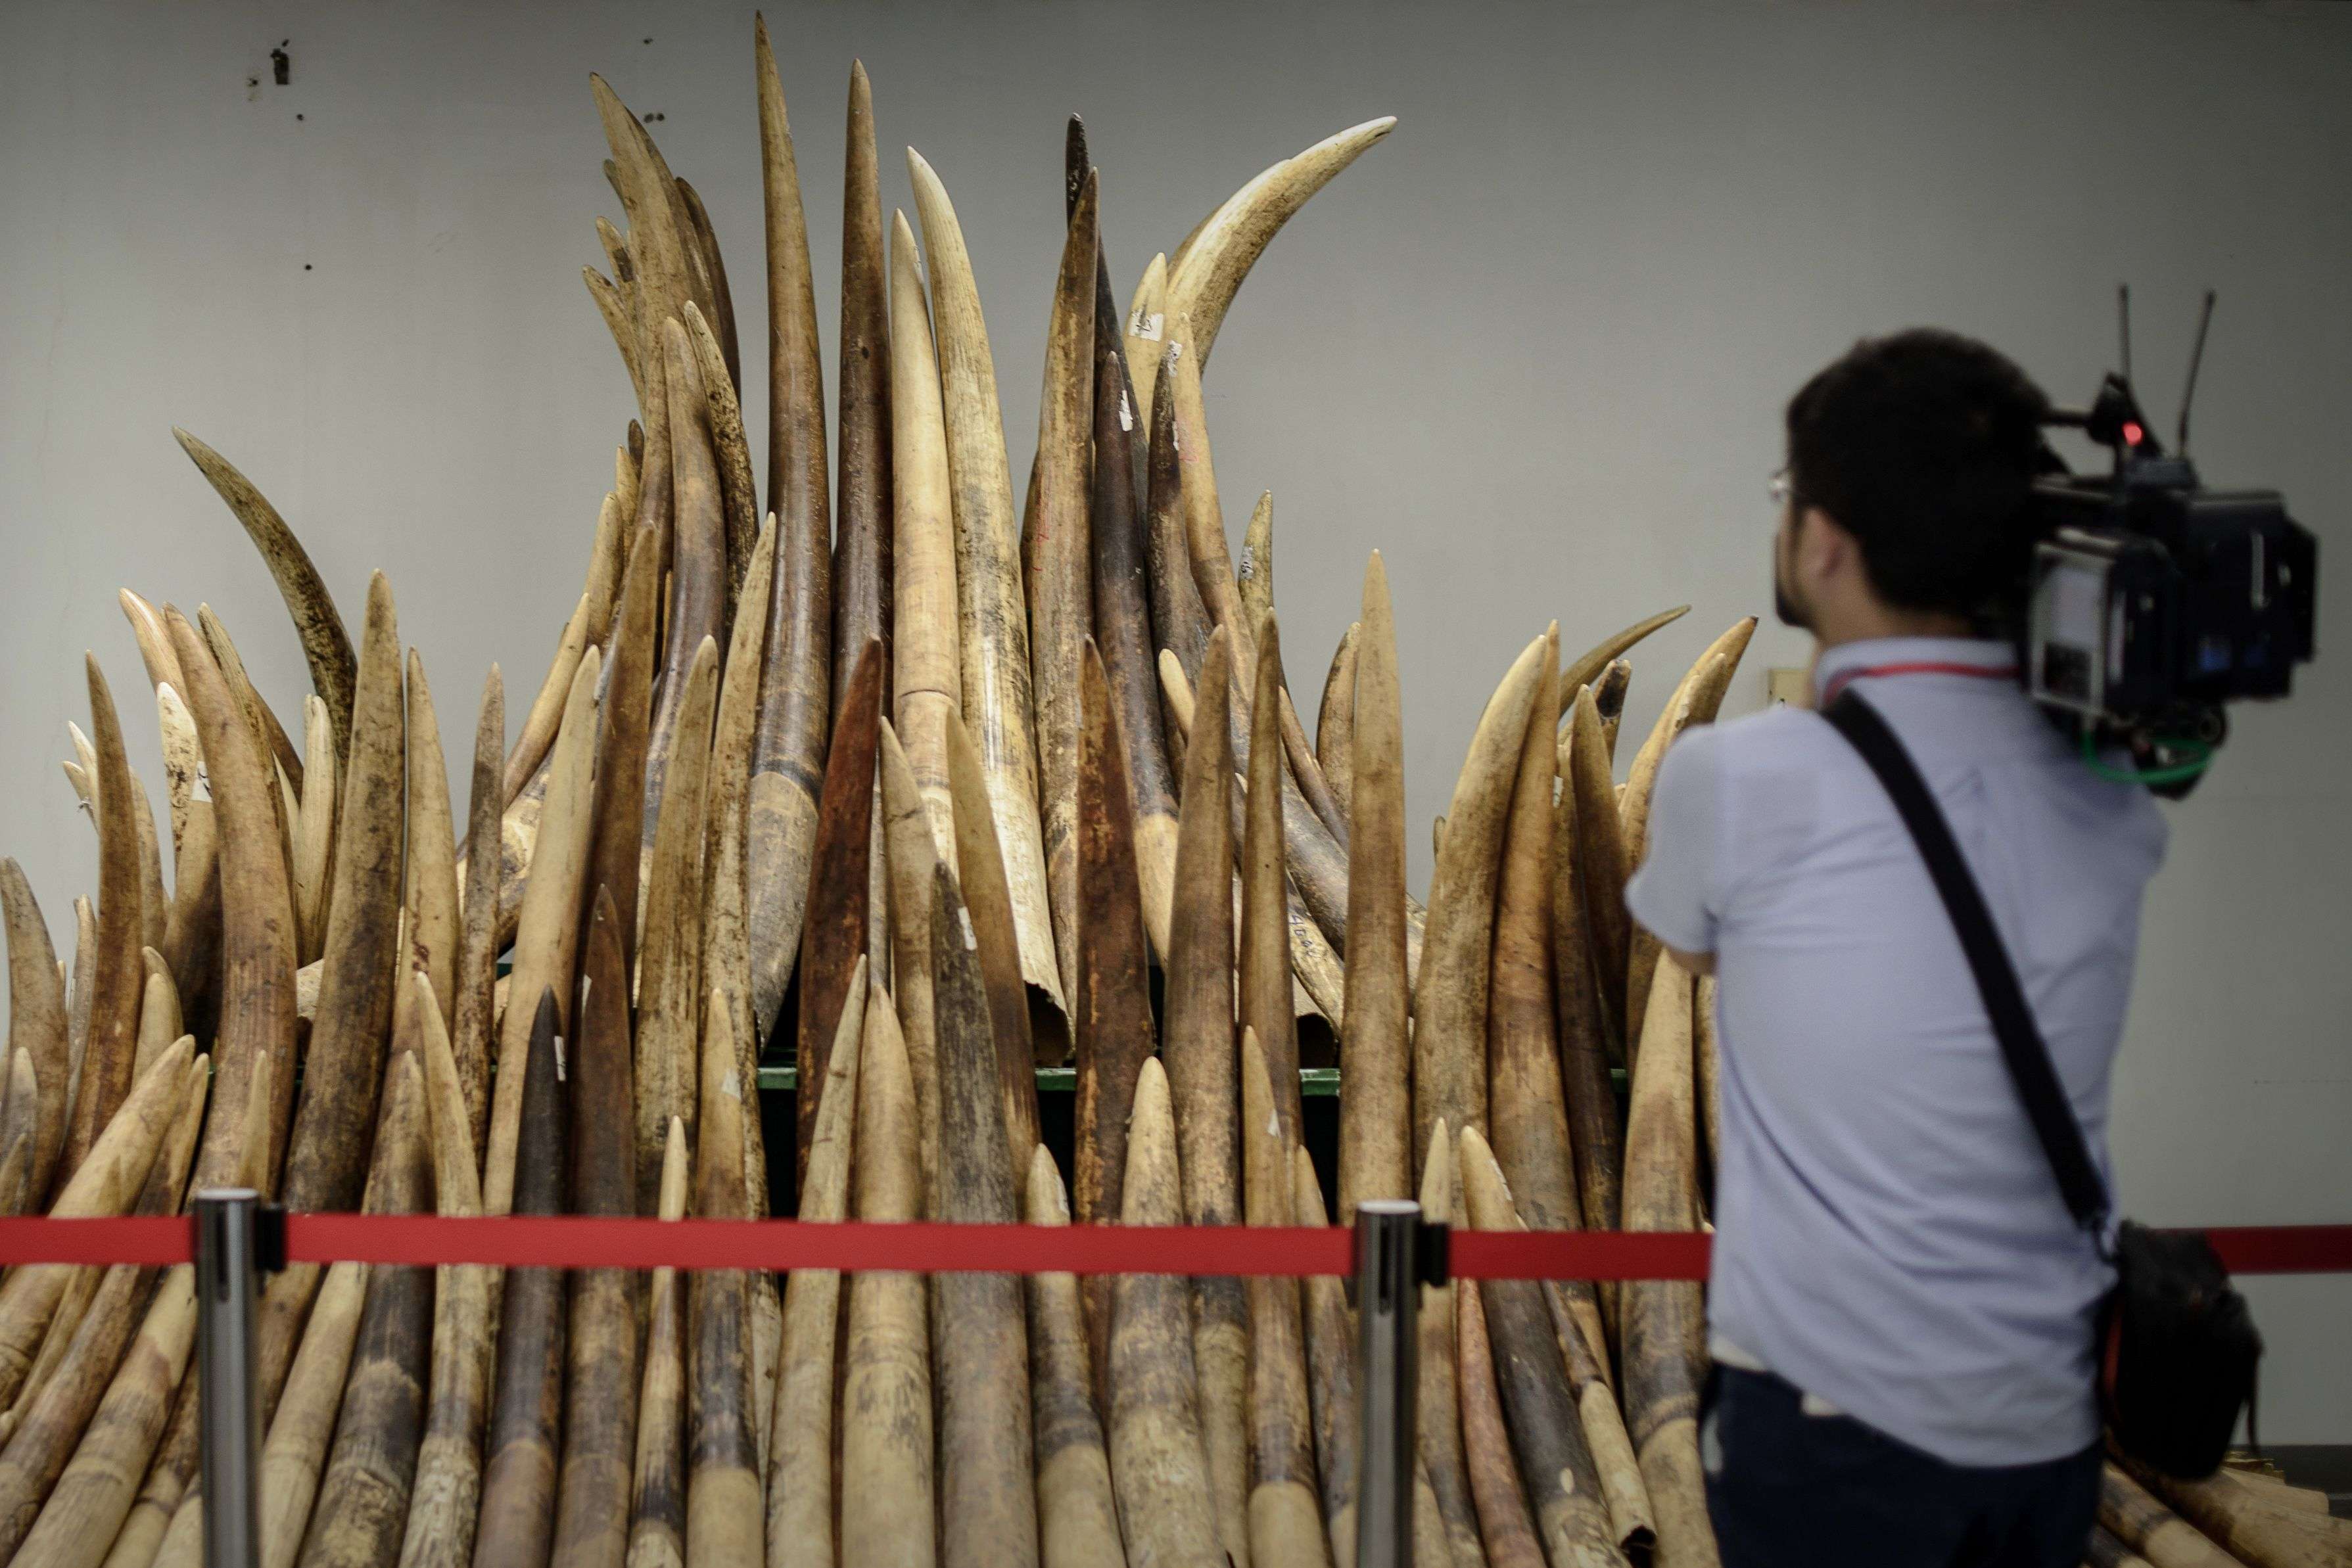 A cameraman in Hong Kong films seized ivory tusks prior to their incineration in 2014. Apart from being a major transit conduit for ivory, Hong Kong also boasts one of the world’s largest remaining ivory retail markets. Photo: AFP